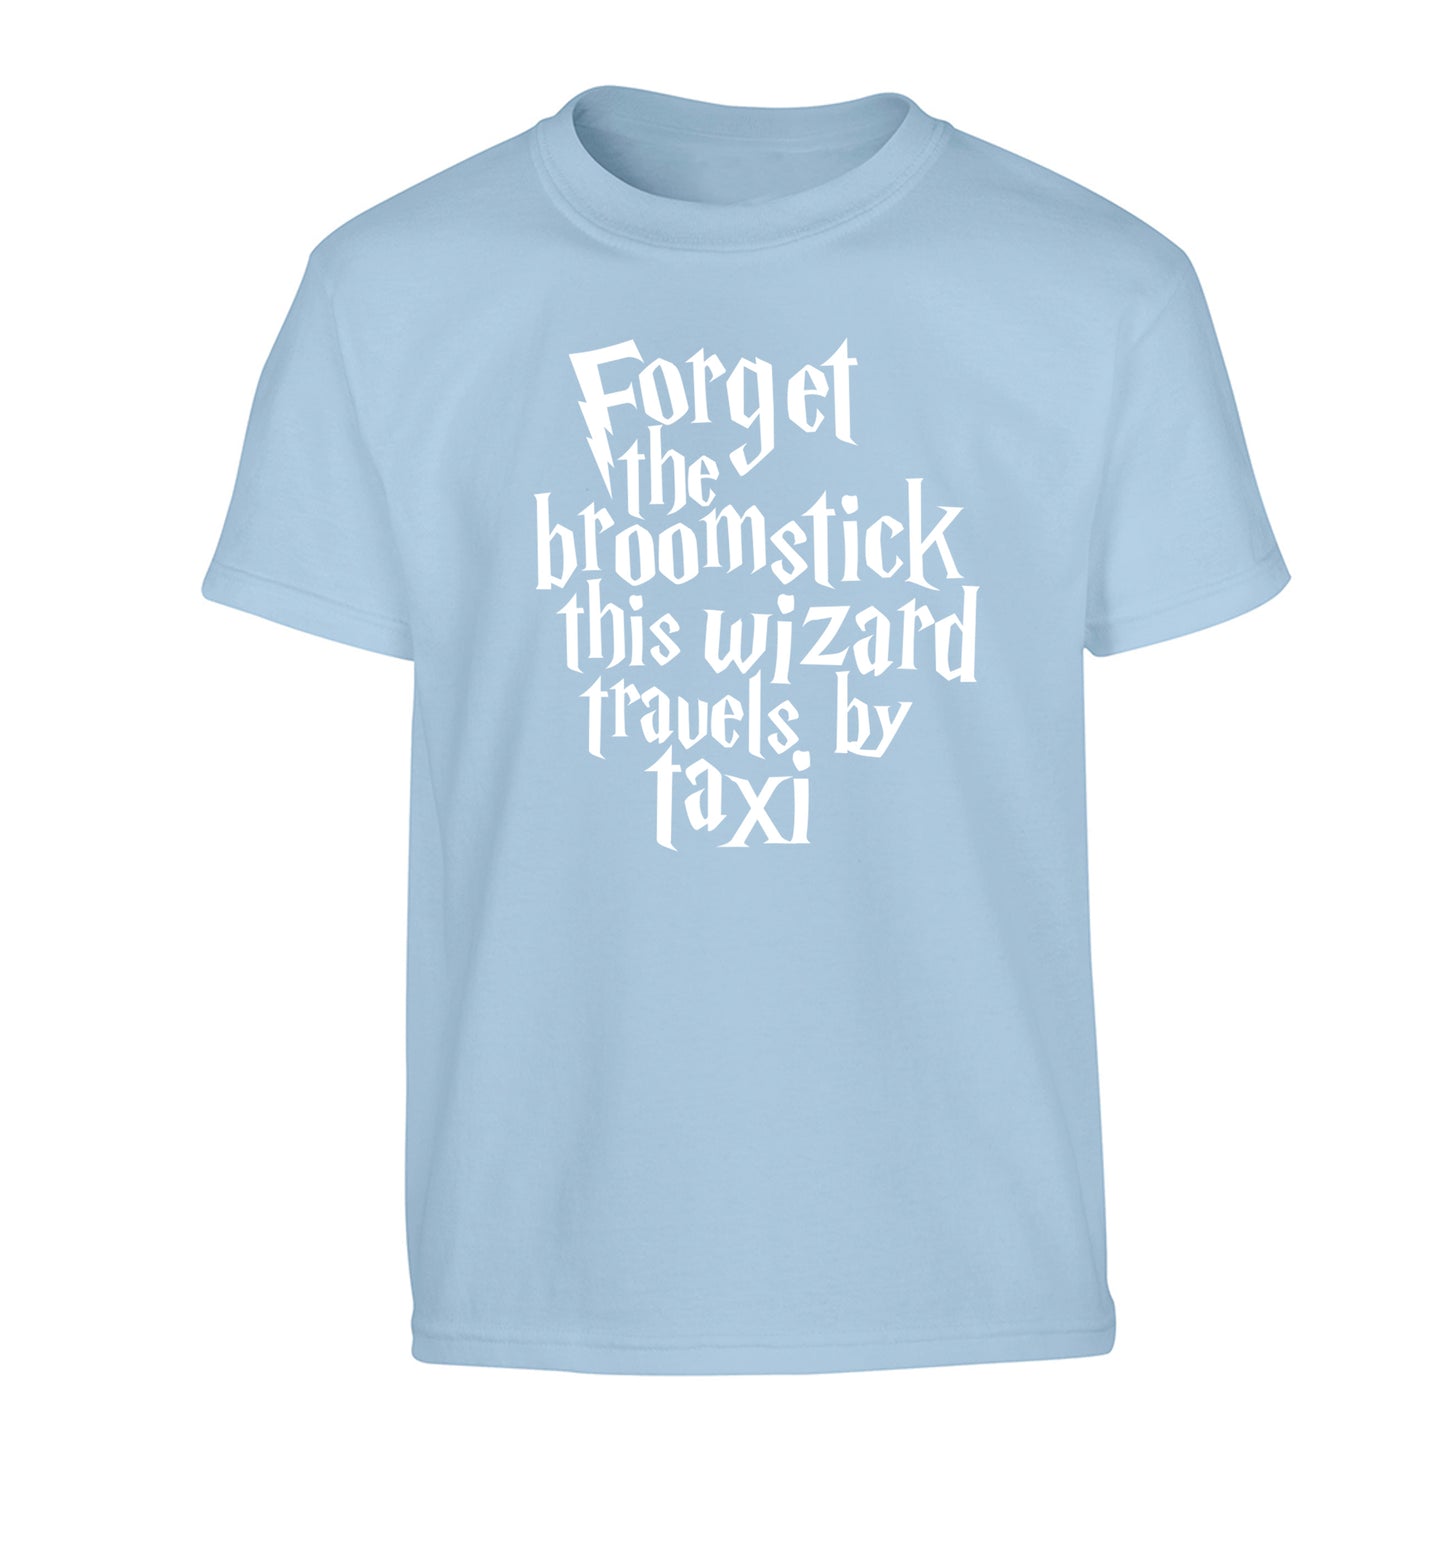 Forget the broomstick this wizard travels by taxi Children's light blue Tshirt 12-14 Years